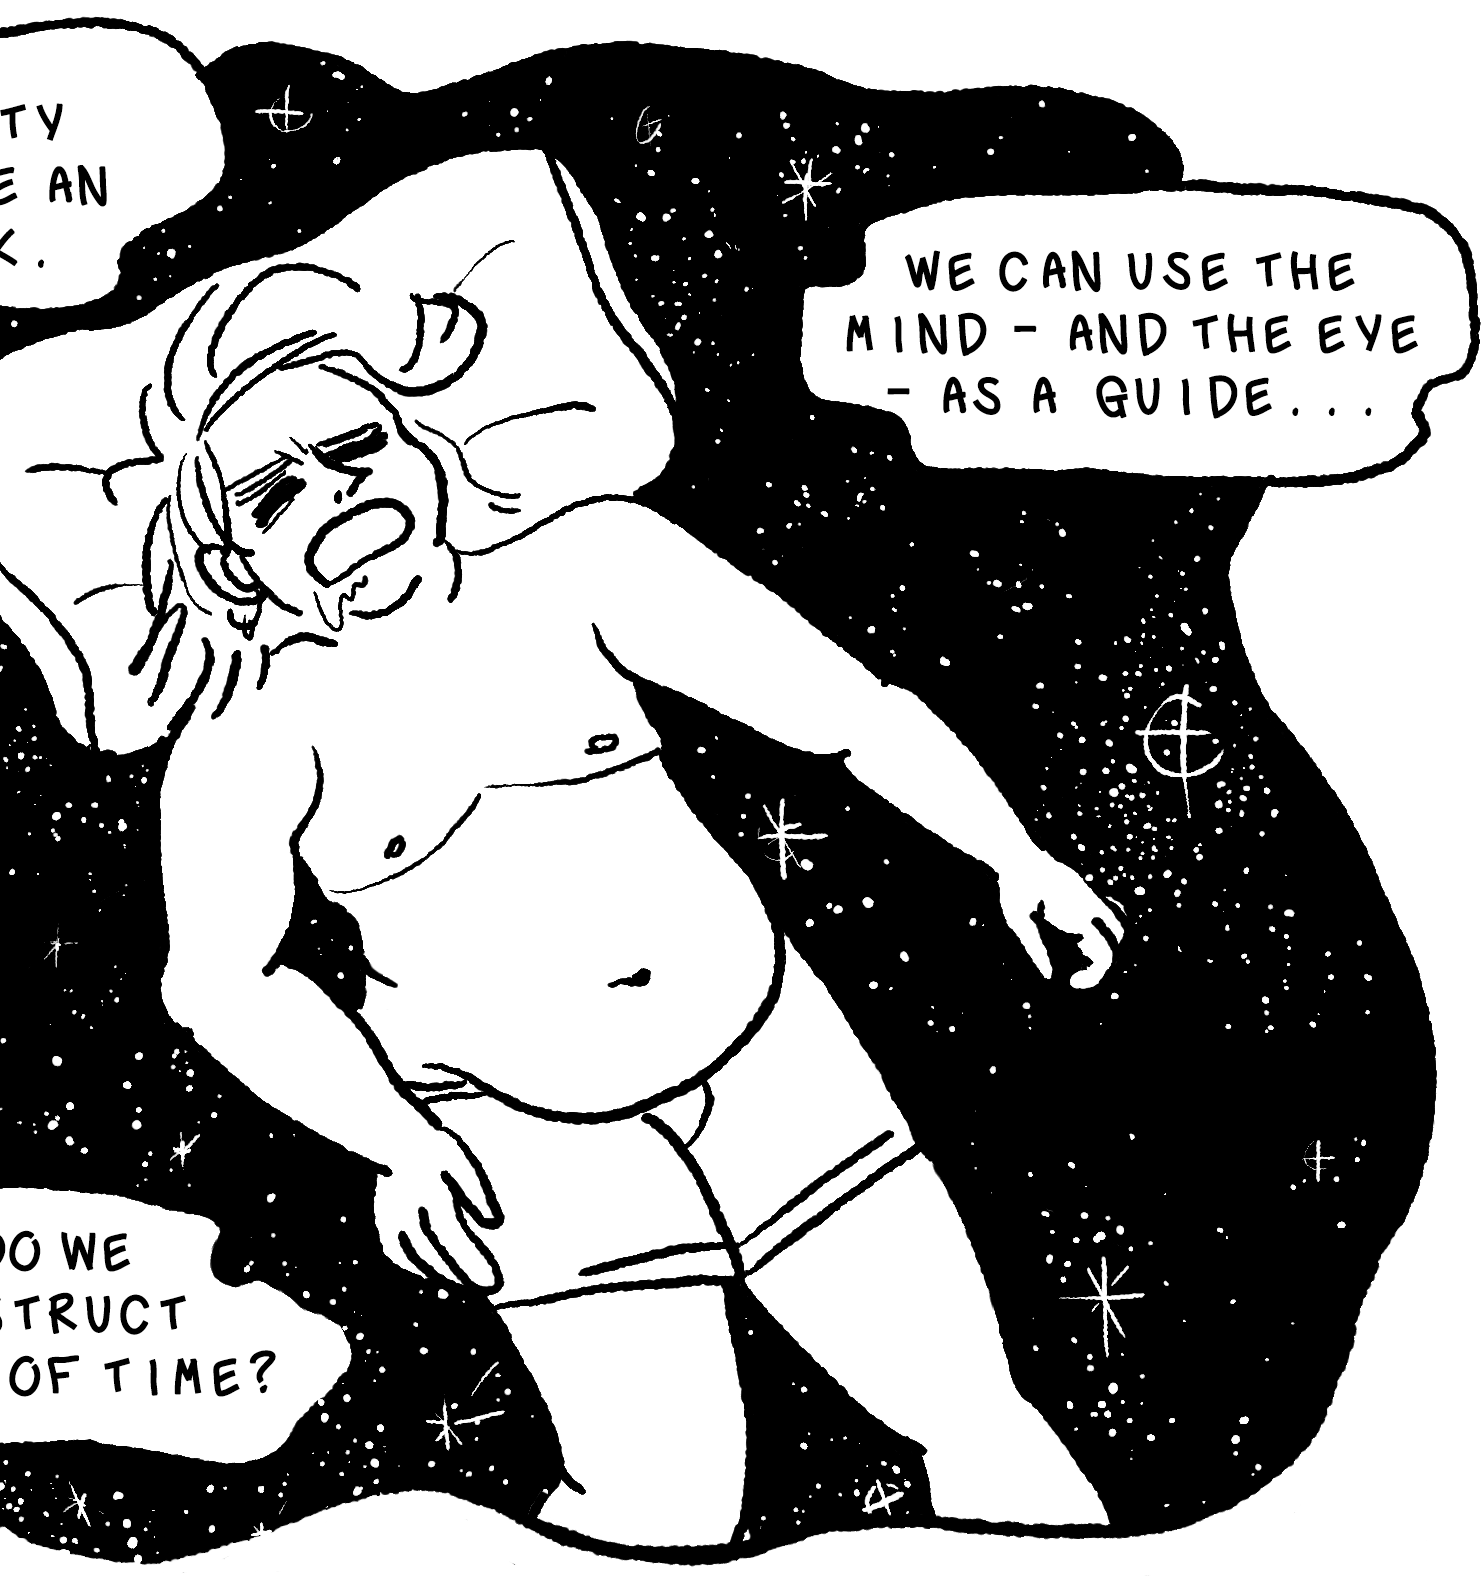 In the final pseudo-panel, we see Elk asleep just in his boxers with his belly hanging out and top surgery scars on full display, drooling unceremoniously. While his head is rested on a pillow, instead of lying on a bed he is suspended in a black and white rendition of the night sky, with myriad glimmering stars behind him, contained in a wavy panel, again surrounded by woogly speech bubbles hanging in space around him. The first reads, Drawing the unity itself seems like an impossible task. The next down reads, Humans never see continuity; we blink, we sleep, we faint. Then, counter-clockwise, How do we reconstruct 'chunks' of time? The final speech bubble reads, We can use the mind - and the eye - as guide.